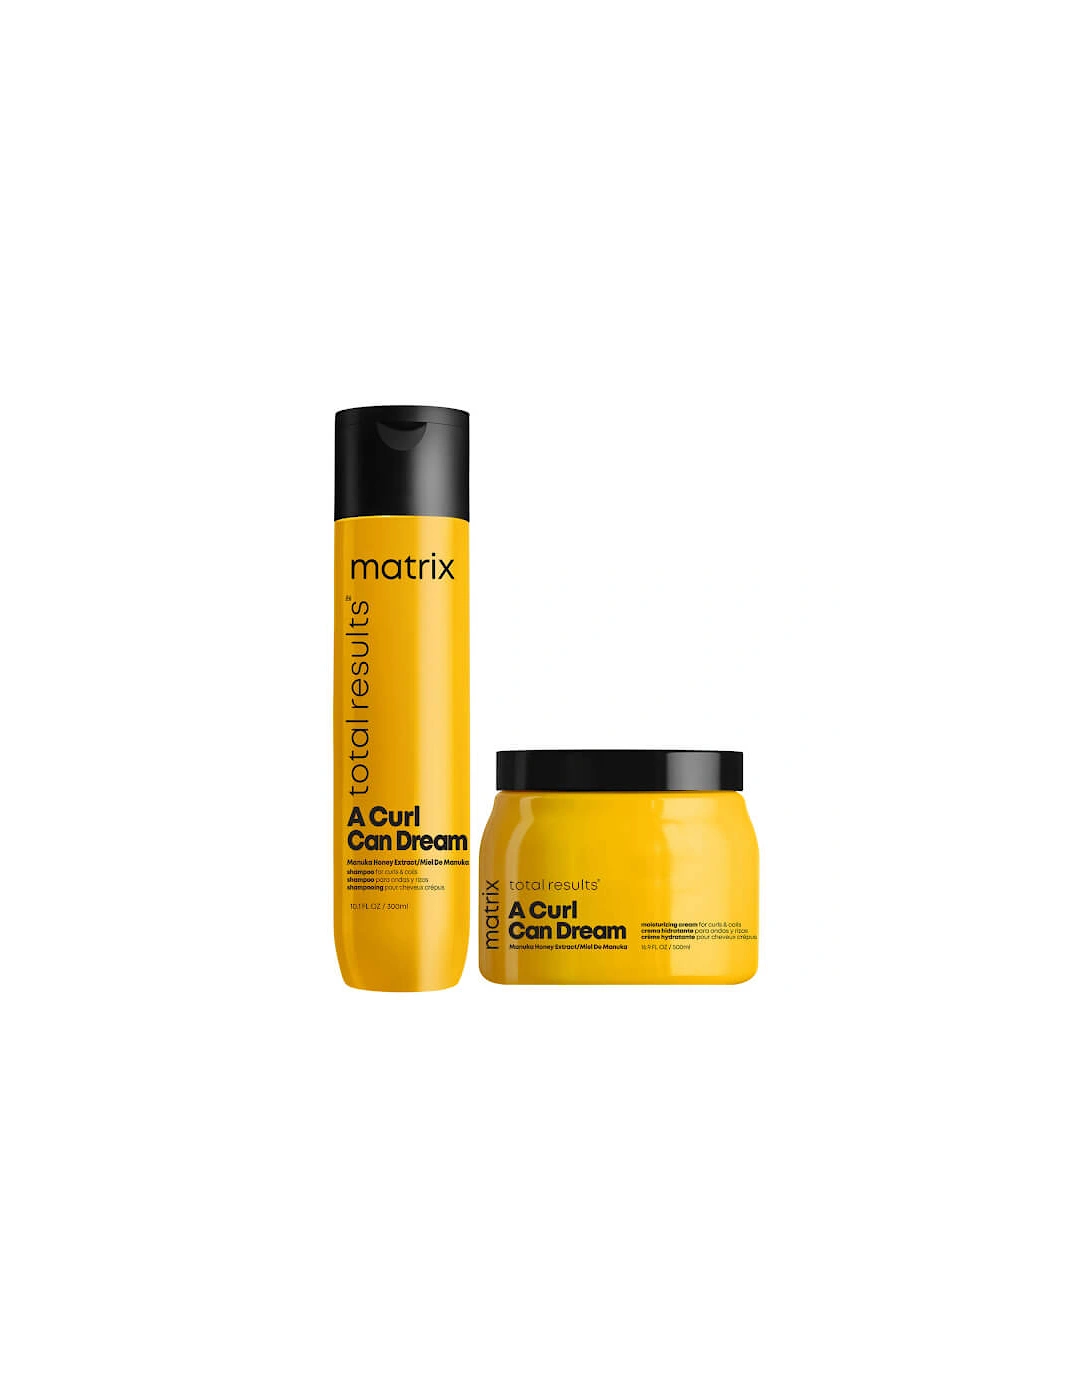 Total Results A Curl Can Dream Cleansing Shampoo and Moisturising Cream Duo, 2 of 1